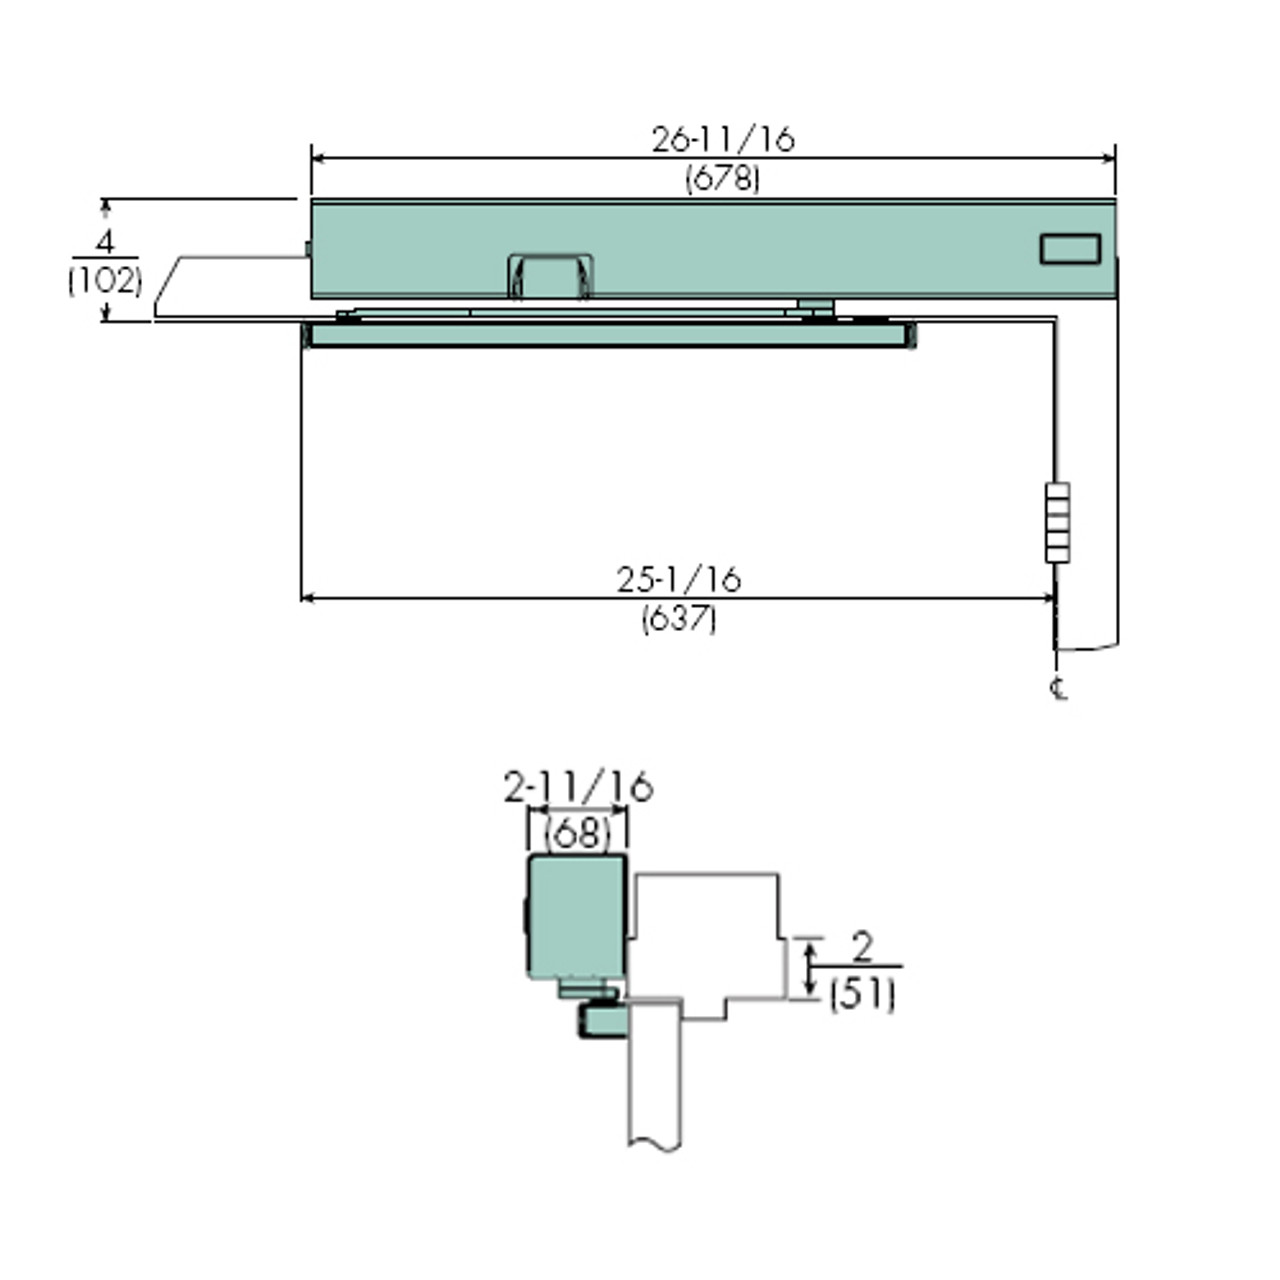 7154SZ-LH-120VAC-691 Norton 7100SZ Series Safe Zone Multi-Point Closer/Holder with Motion Sensor and Pull Side Double Egress Arm and Slide Track in Dull Bronze Finish